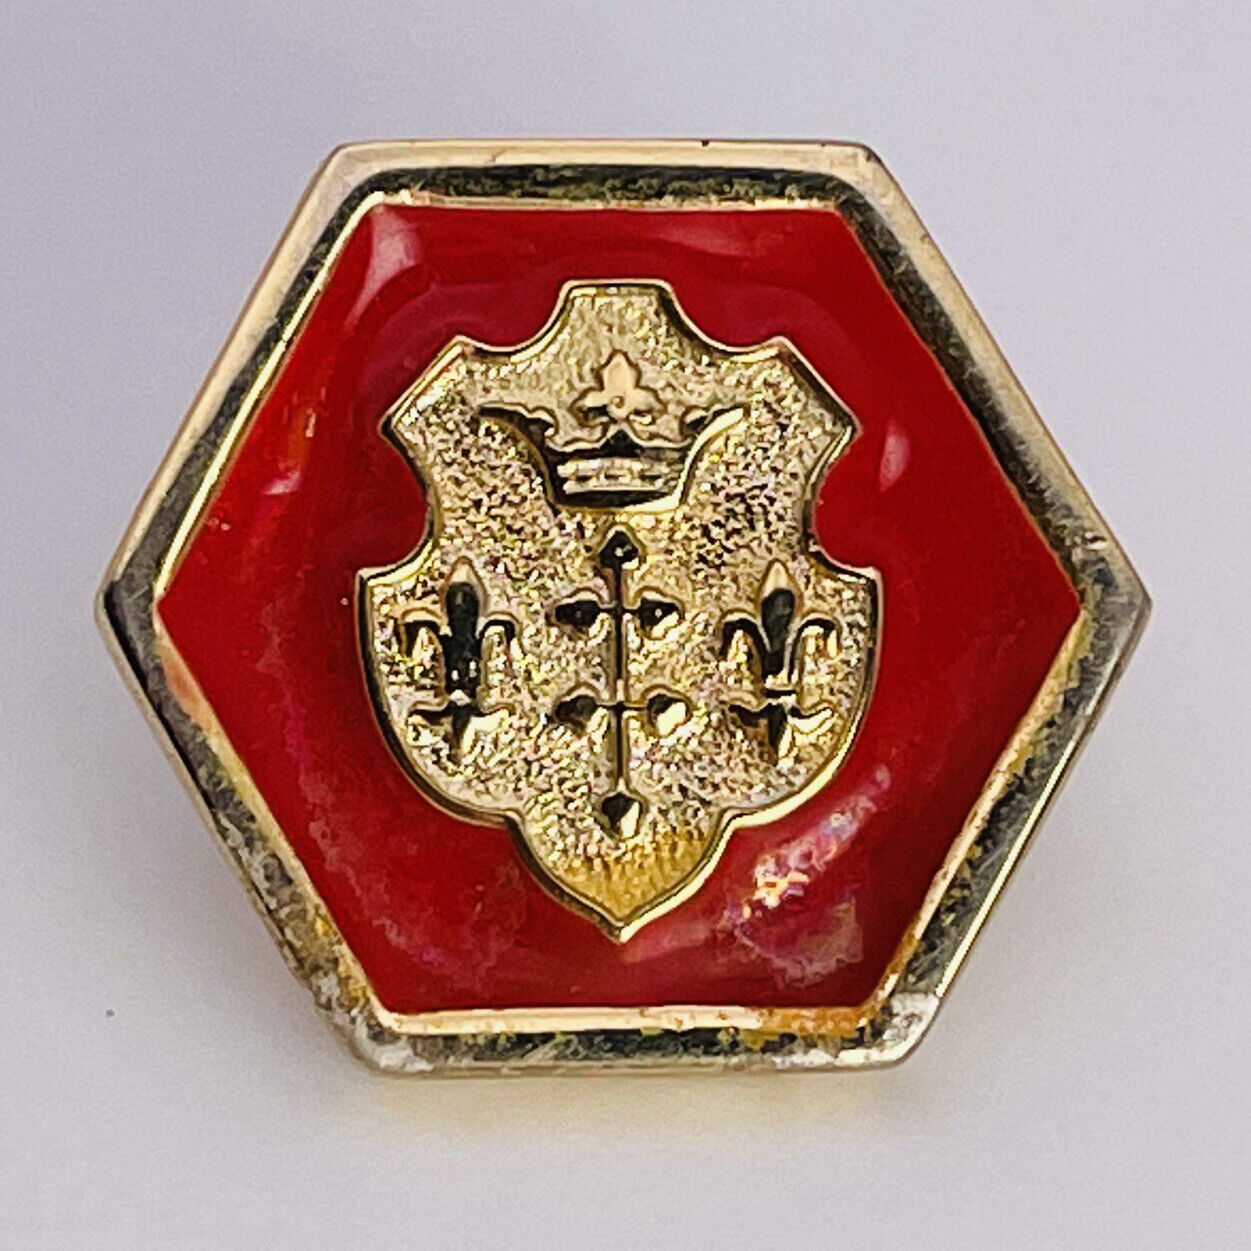 Absolutely Stunning European Crest (?) On Deep Red - Enamel/Gold-Tone Lapel Pin